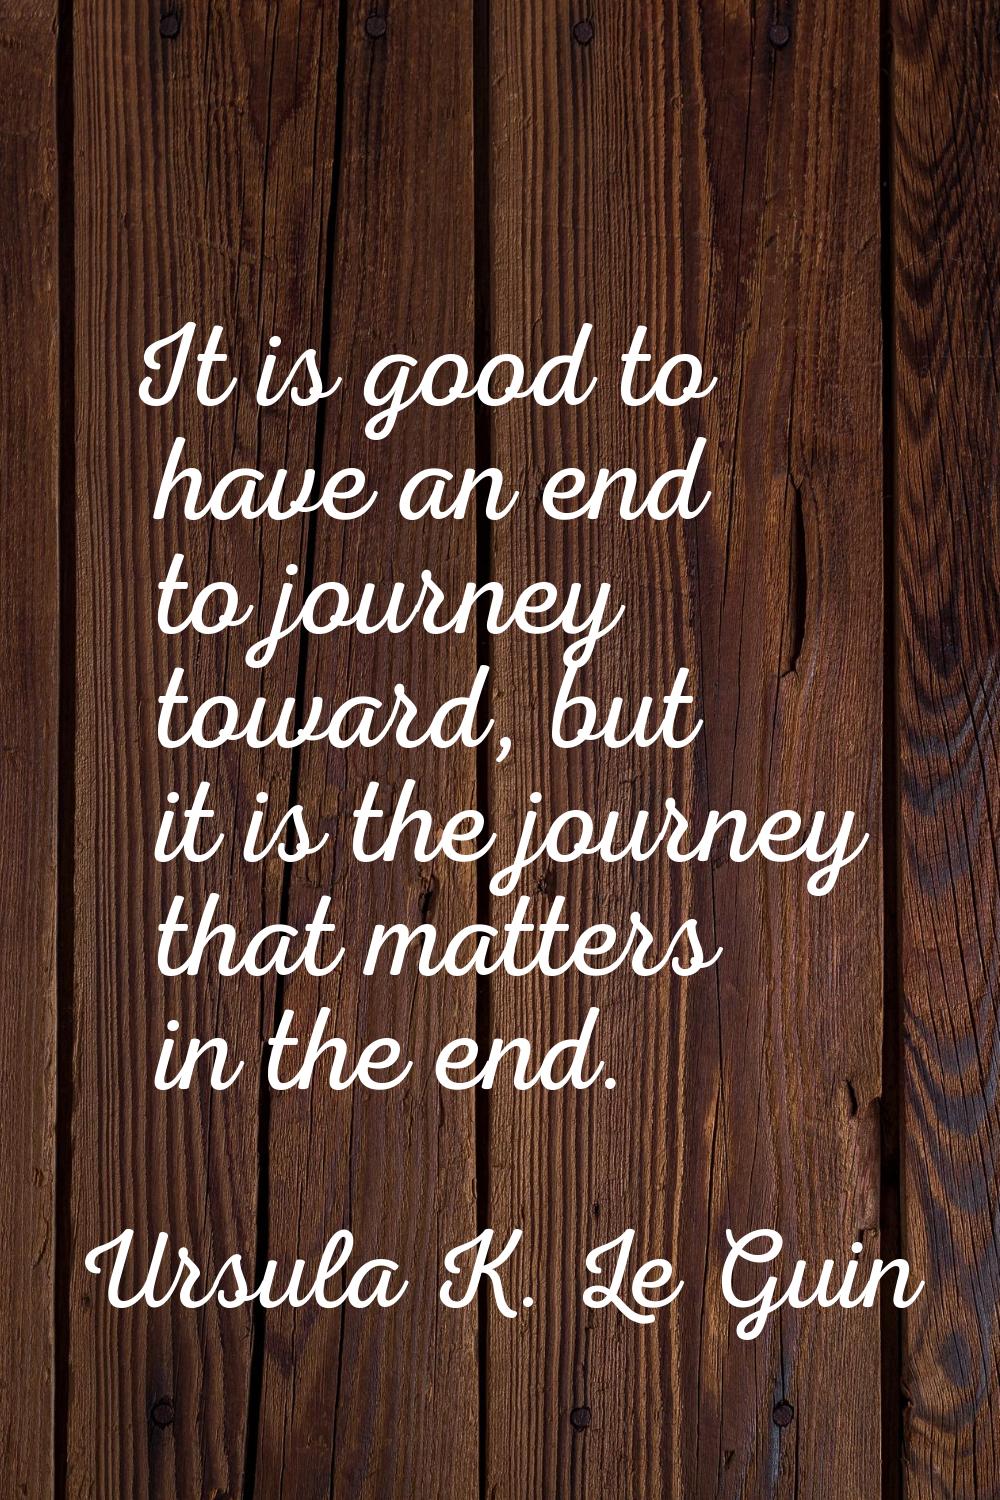 It is good to have an end to journey toward, but it is the journey that matters in the end.